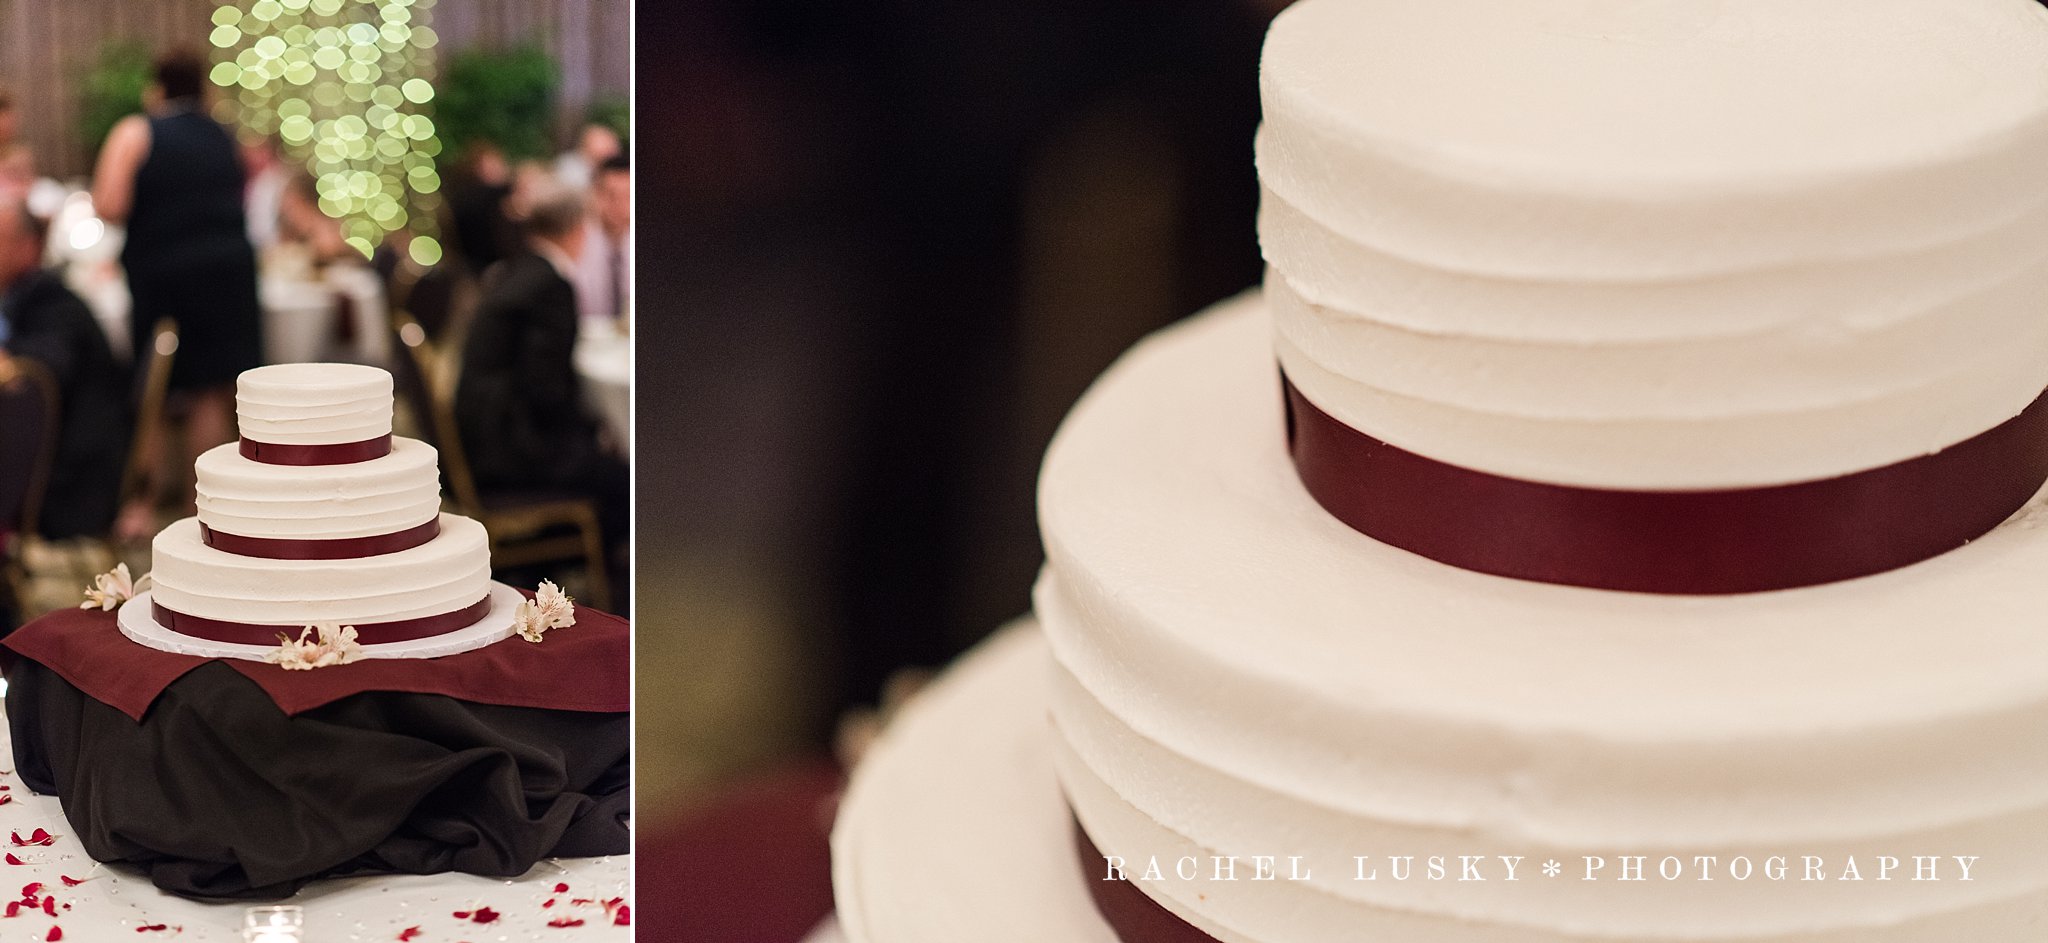 Bel-Aire Clarion Hotel, Erie PA Wedding Photography